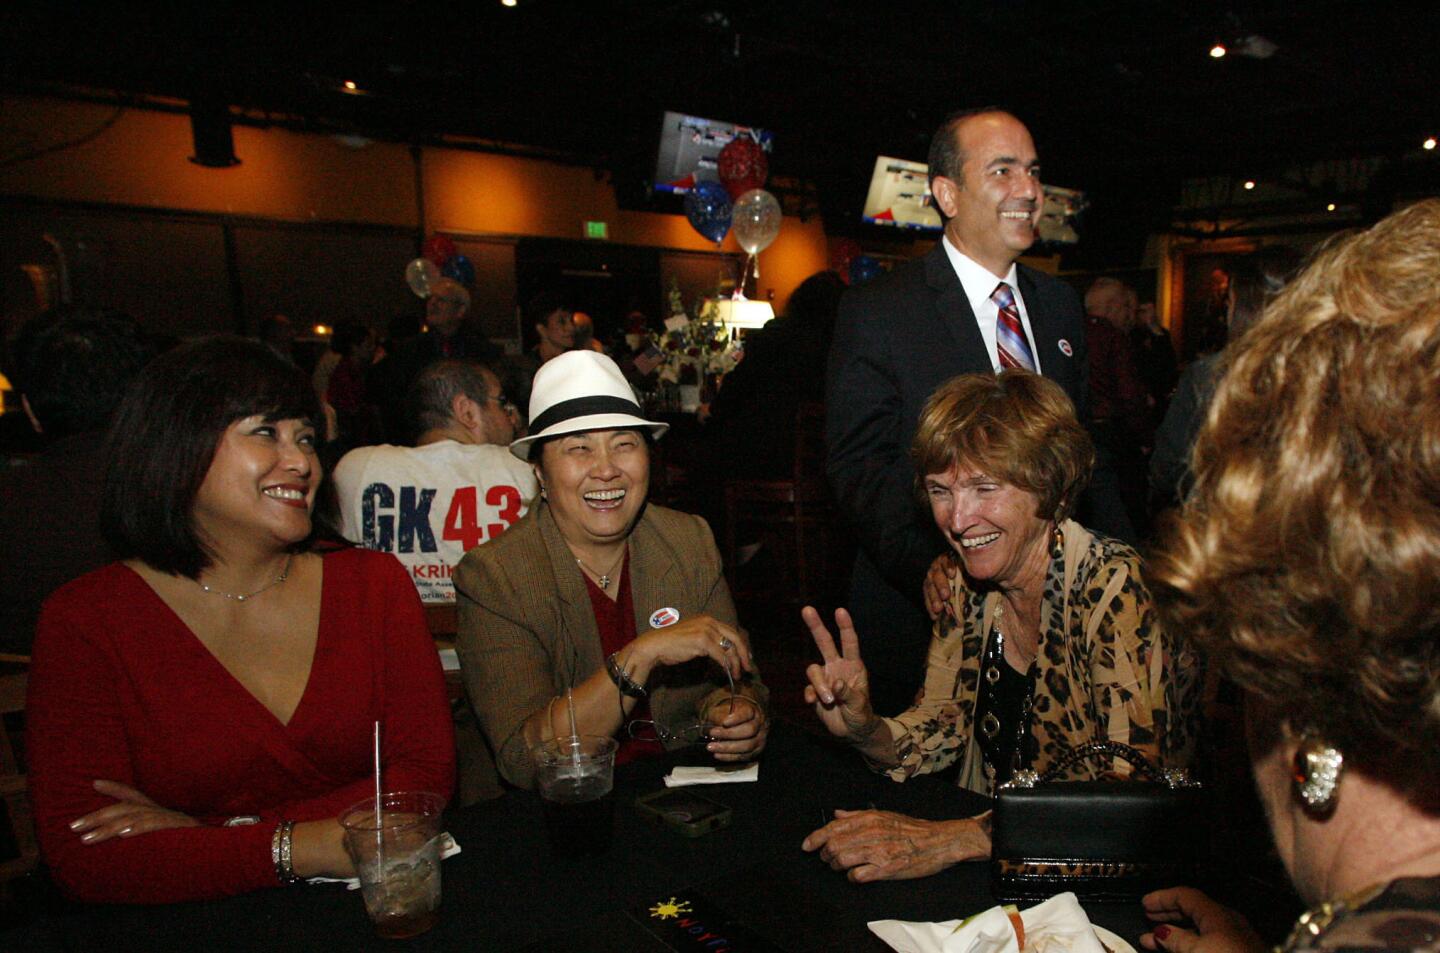 Supporters Arleen Penaflor, from left, Edith Fuentes and Cathy Zappala, second right, are greeted by State Assembly candidate Greg Krikorian on election night, which took place at Noypitz restaurant in Glendale on Tuesday, November 6, 2012.